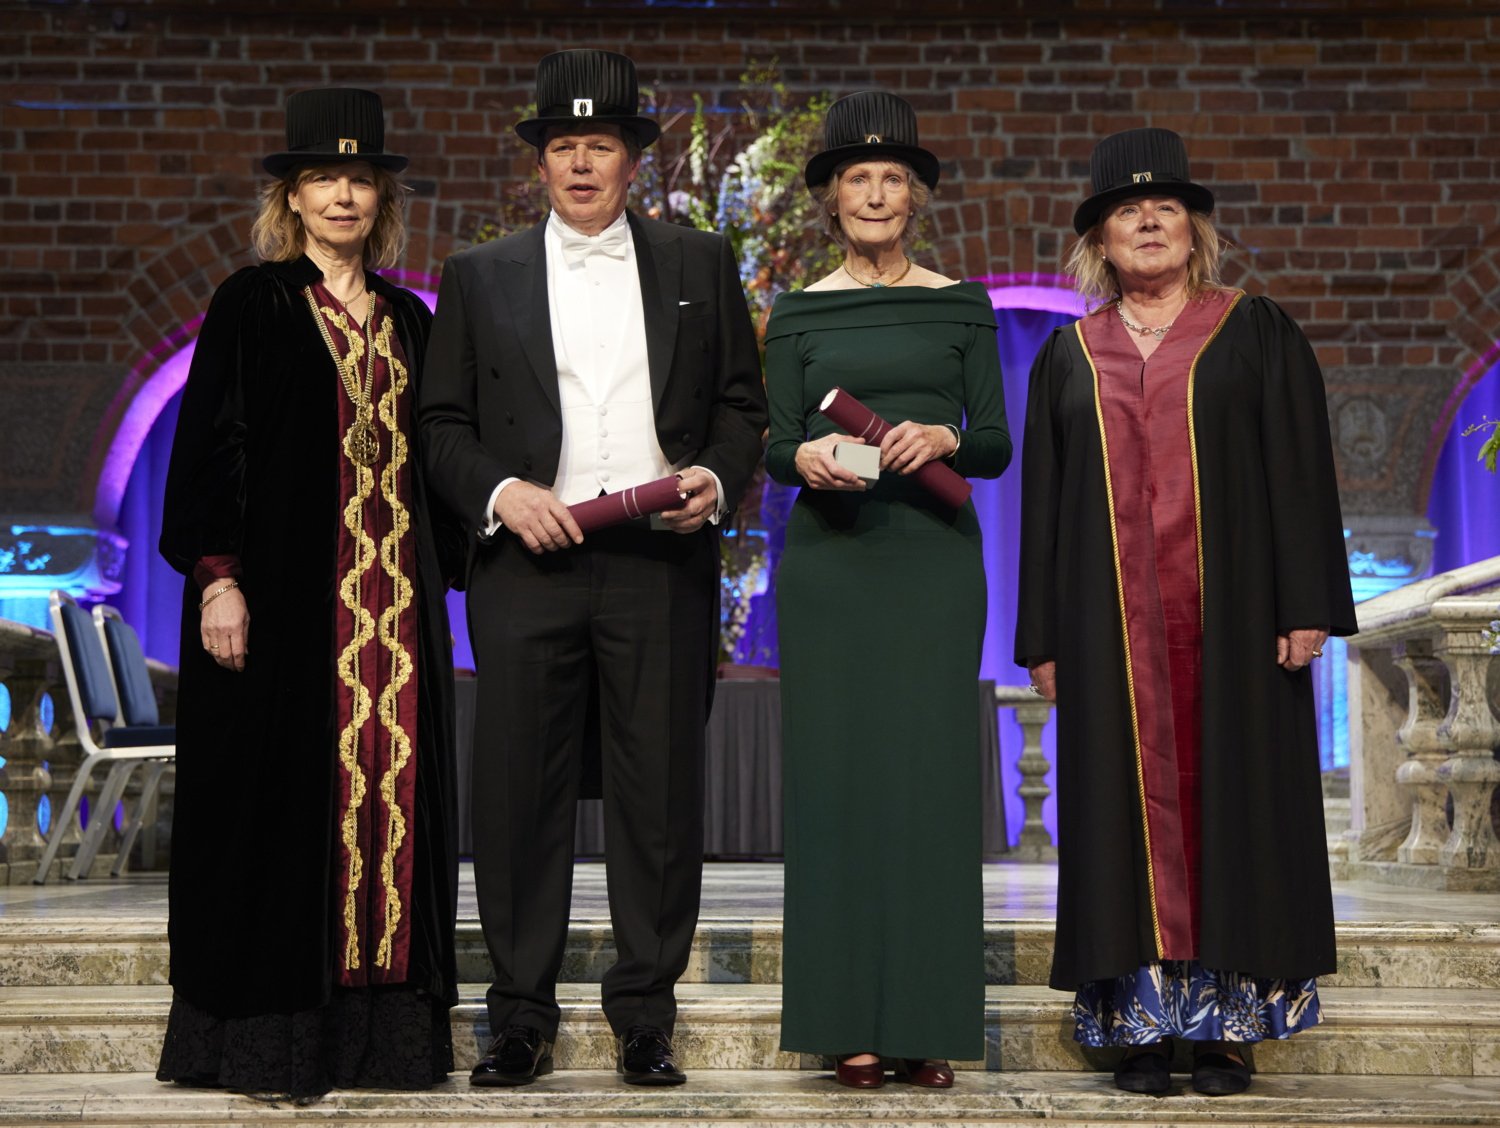 Photo from the doctoral confirment in Stocholm City Hall.